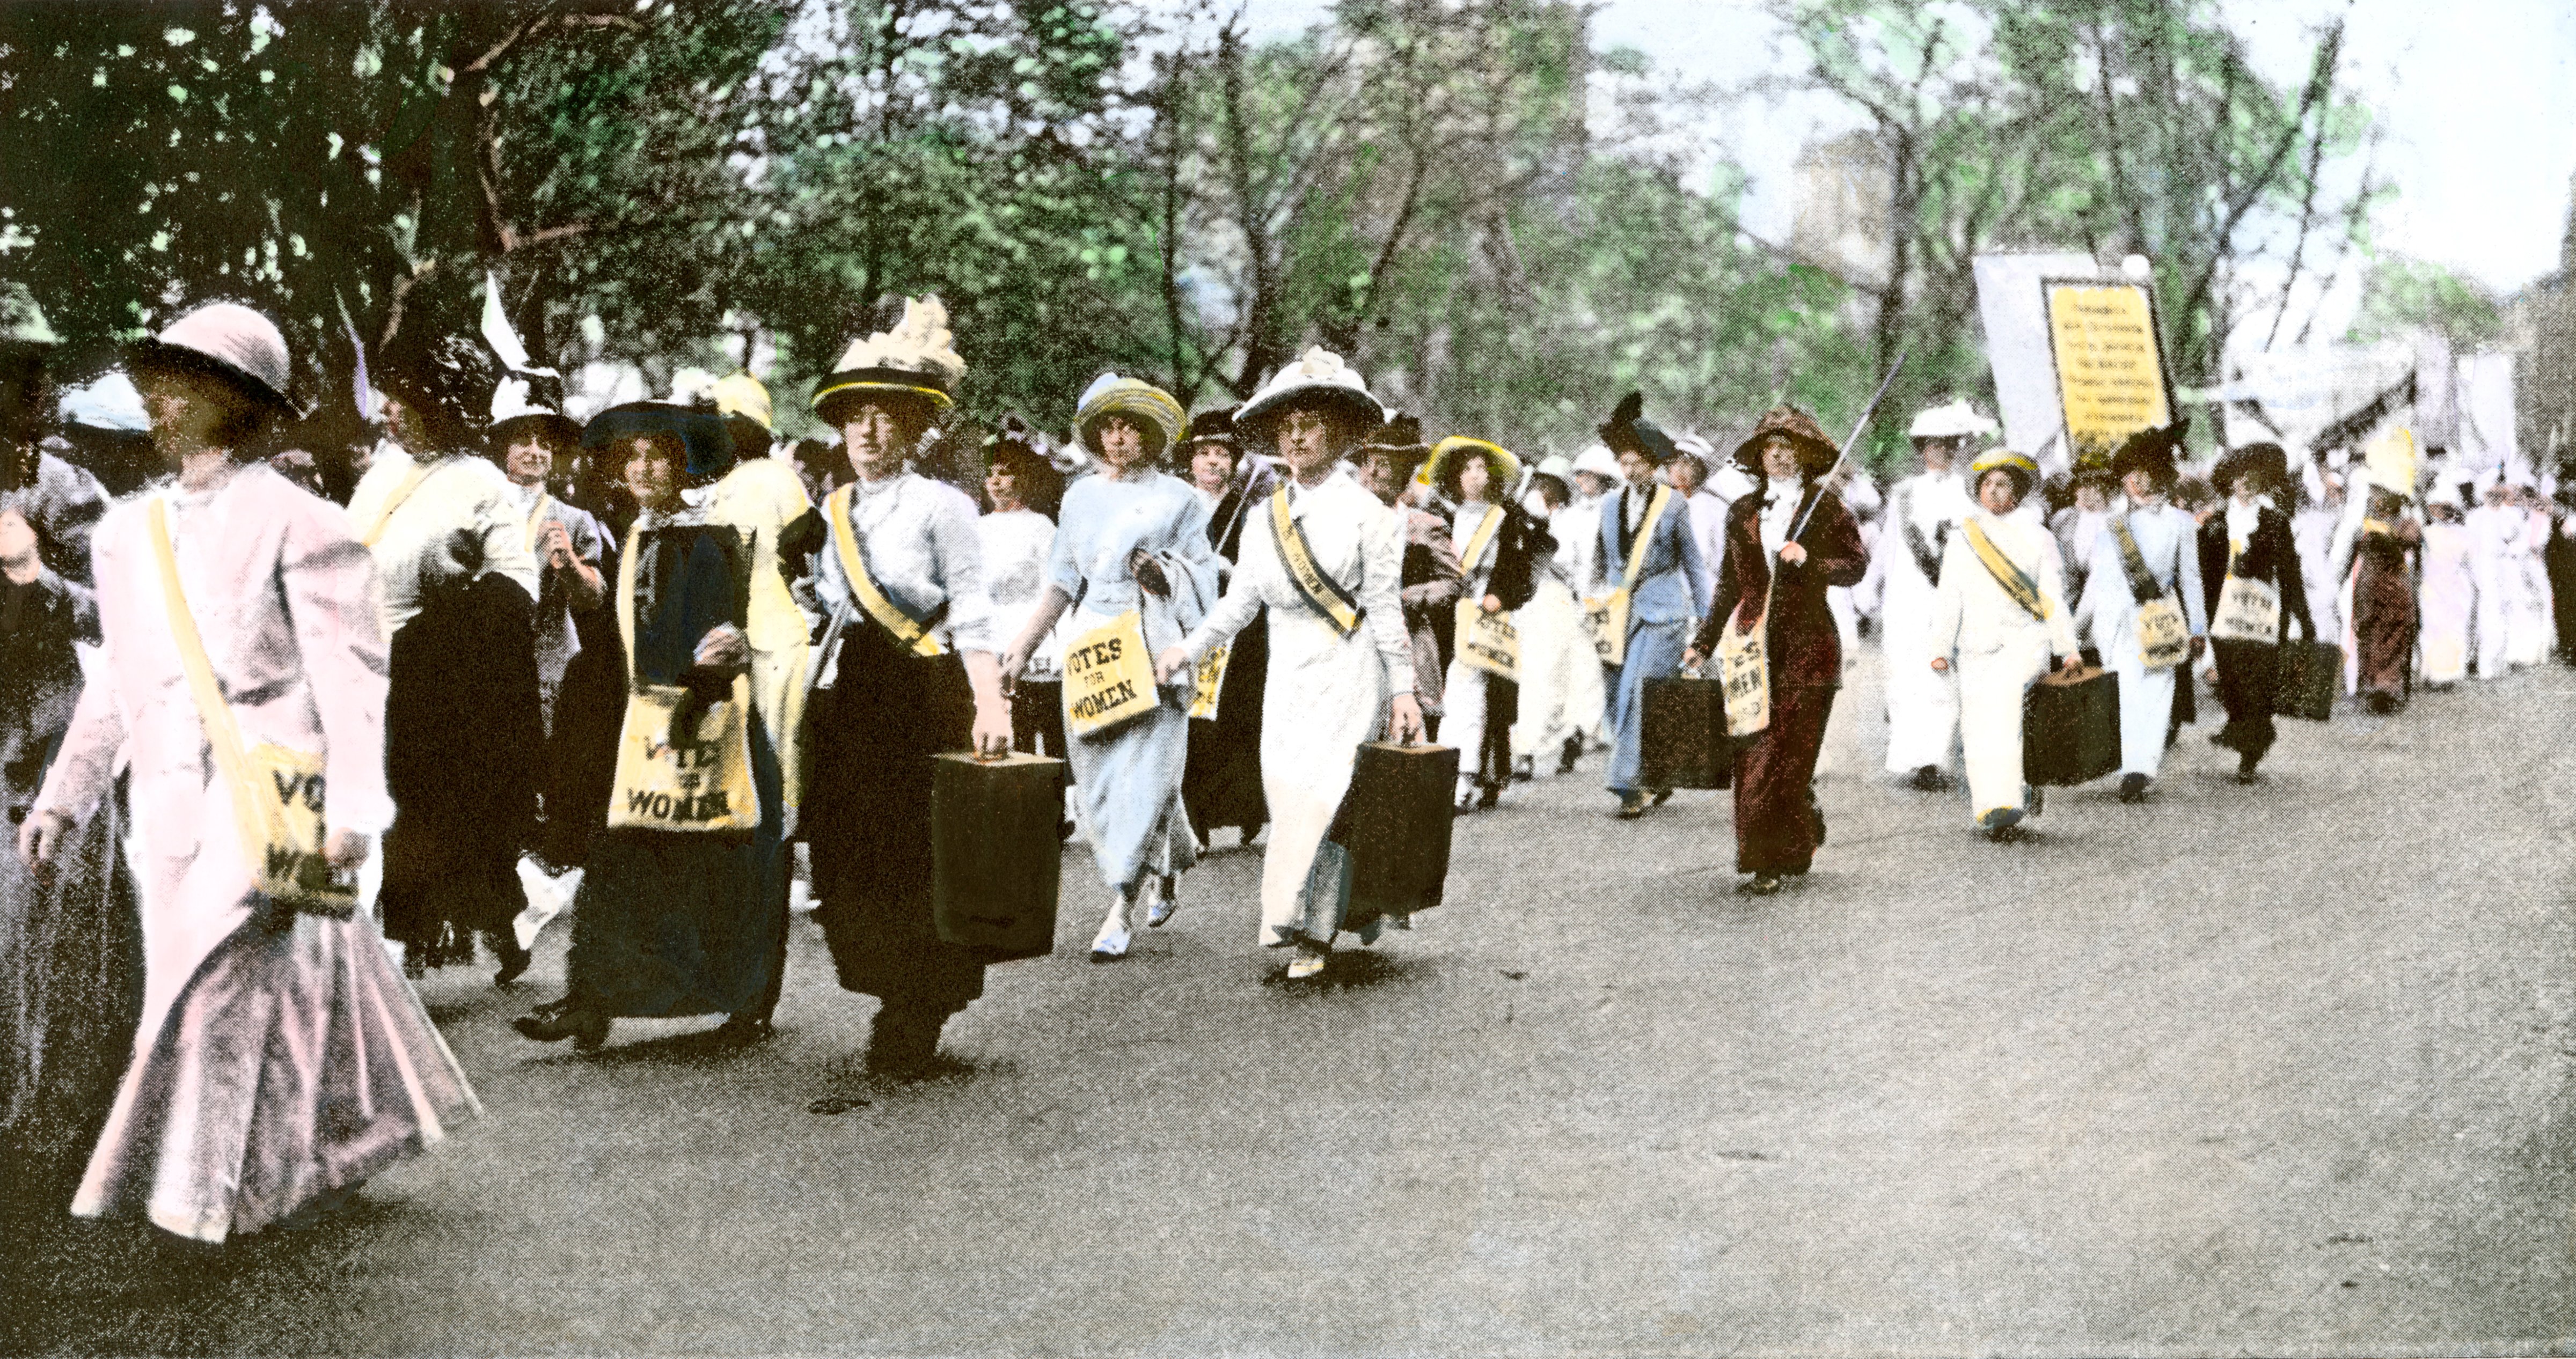 Suffragette marchers carrying portable speaker rostrums, New York City, 1912.
                      Hand-colored halftone reproduction of a photograph (North Wind Picture Archives via AP Images)